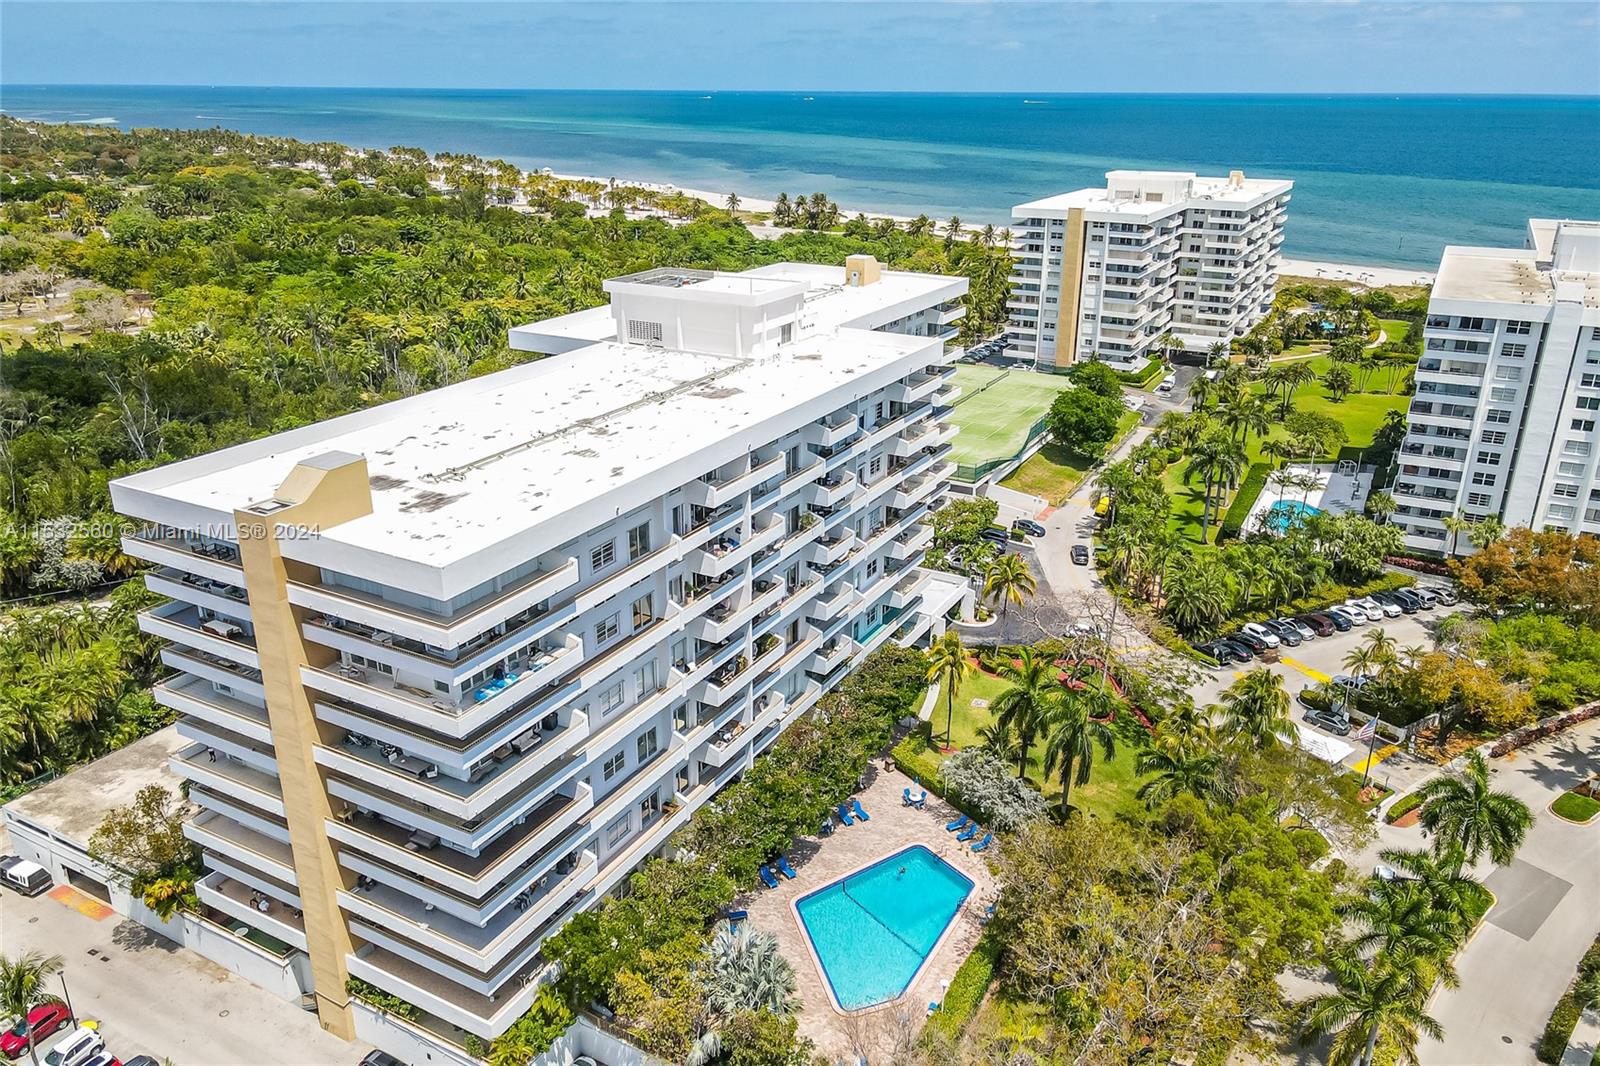 Gorgeous renovated fully furnished 2 bedroom and 2 bathroom unit by famous architect Ramon Alonso at the exclusive Commodore in Key Biscayne. features open kitchen concept with custom cabinets in high-gloss lacquer finish. Engineered wood floors throughout the unit. The primary bedroom with en-suite remodeled bathroom with double sinks and plenty of storage. Comes with one assigned and covered parking space. Commodore Club is a very well-maintained building with many amenities such as direct and private beach access where umbrellas and chairs are provided, tennis courts, a heated pool, exercise room, and more. Don't miss this opportunity. Short term rental allowed minimum 90 days.